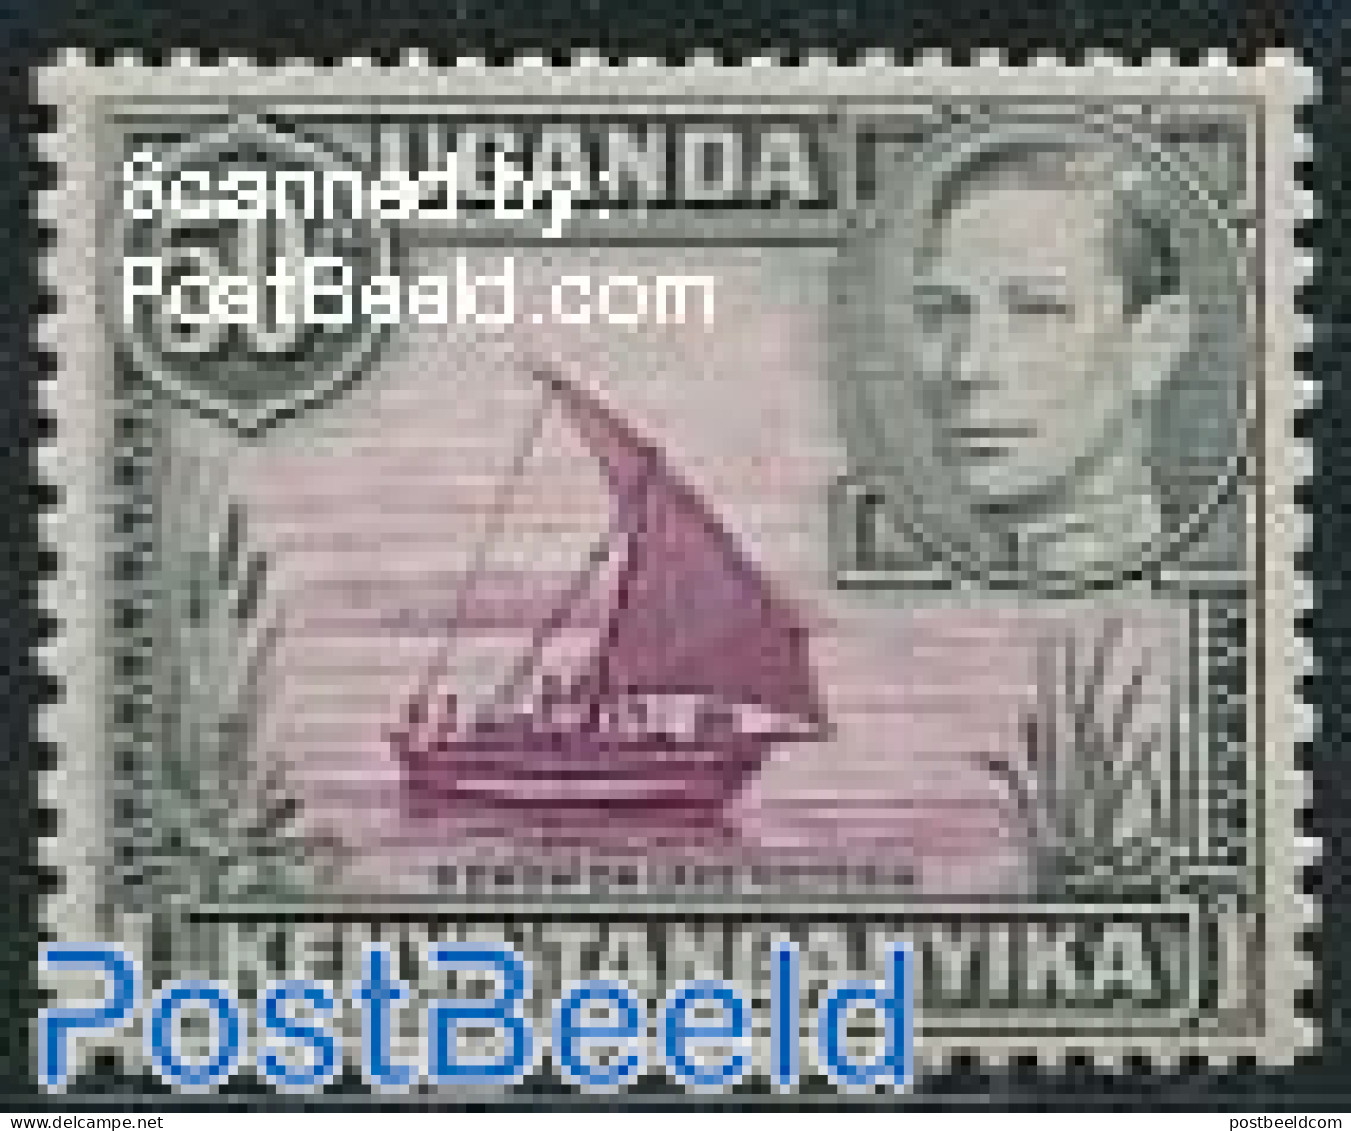 East Africa 1938 50c, Type II, Perf. 13:11.75, Stamp Out Of Set, Mint NH, Transport - Ships And Boats - Bateaux